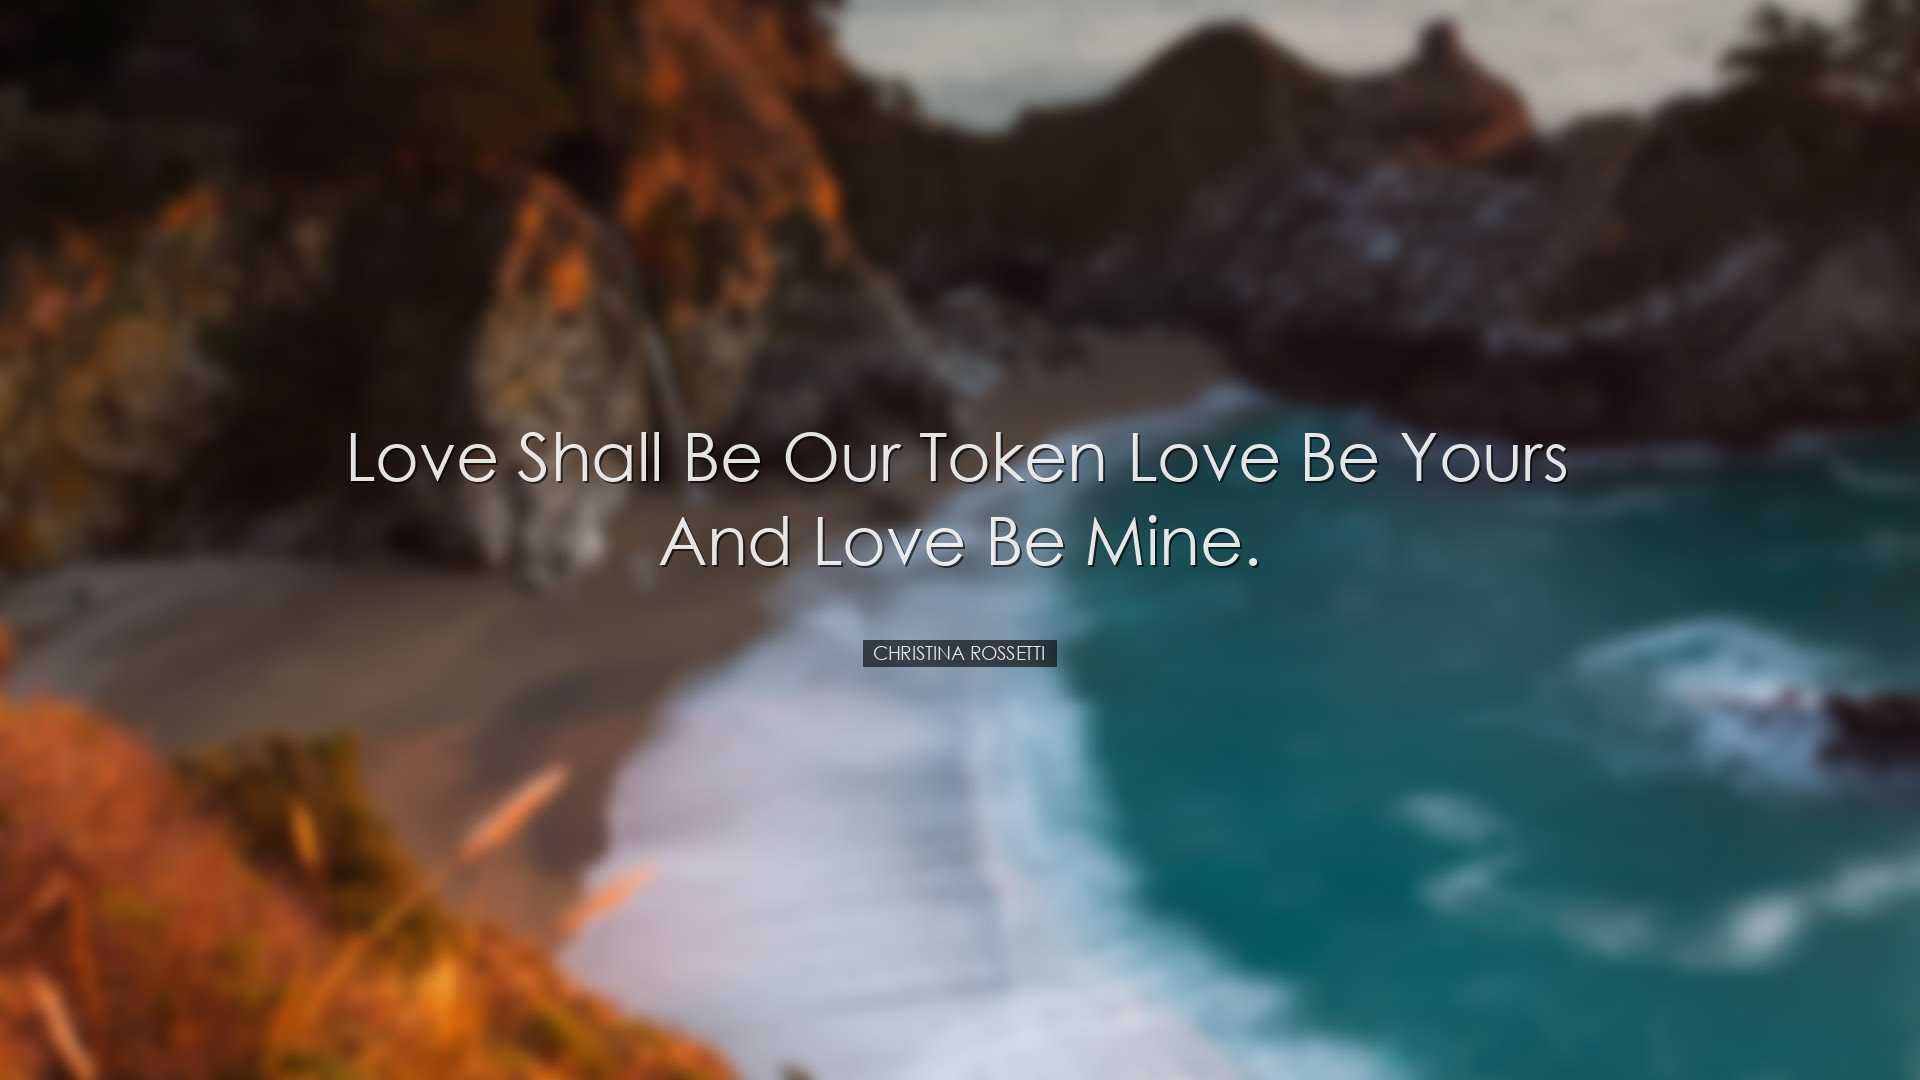 Love shall be our token love be yours and love be mine. - Christin